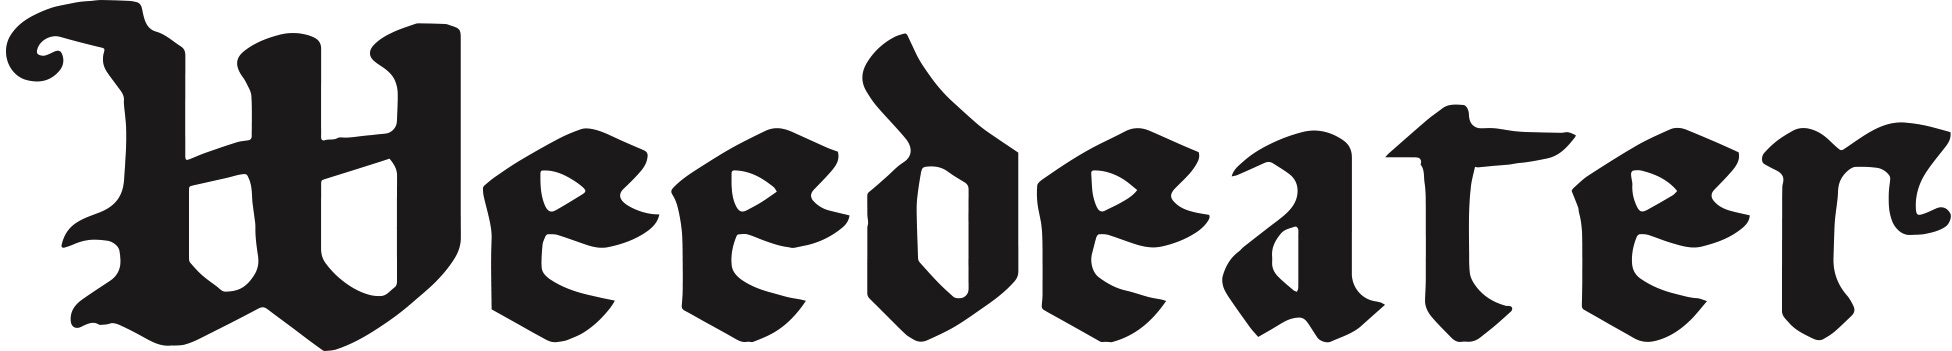 Weedeater Logos